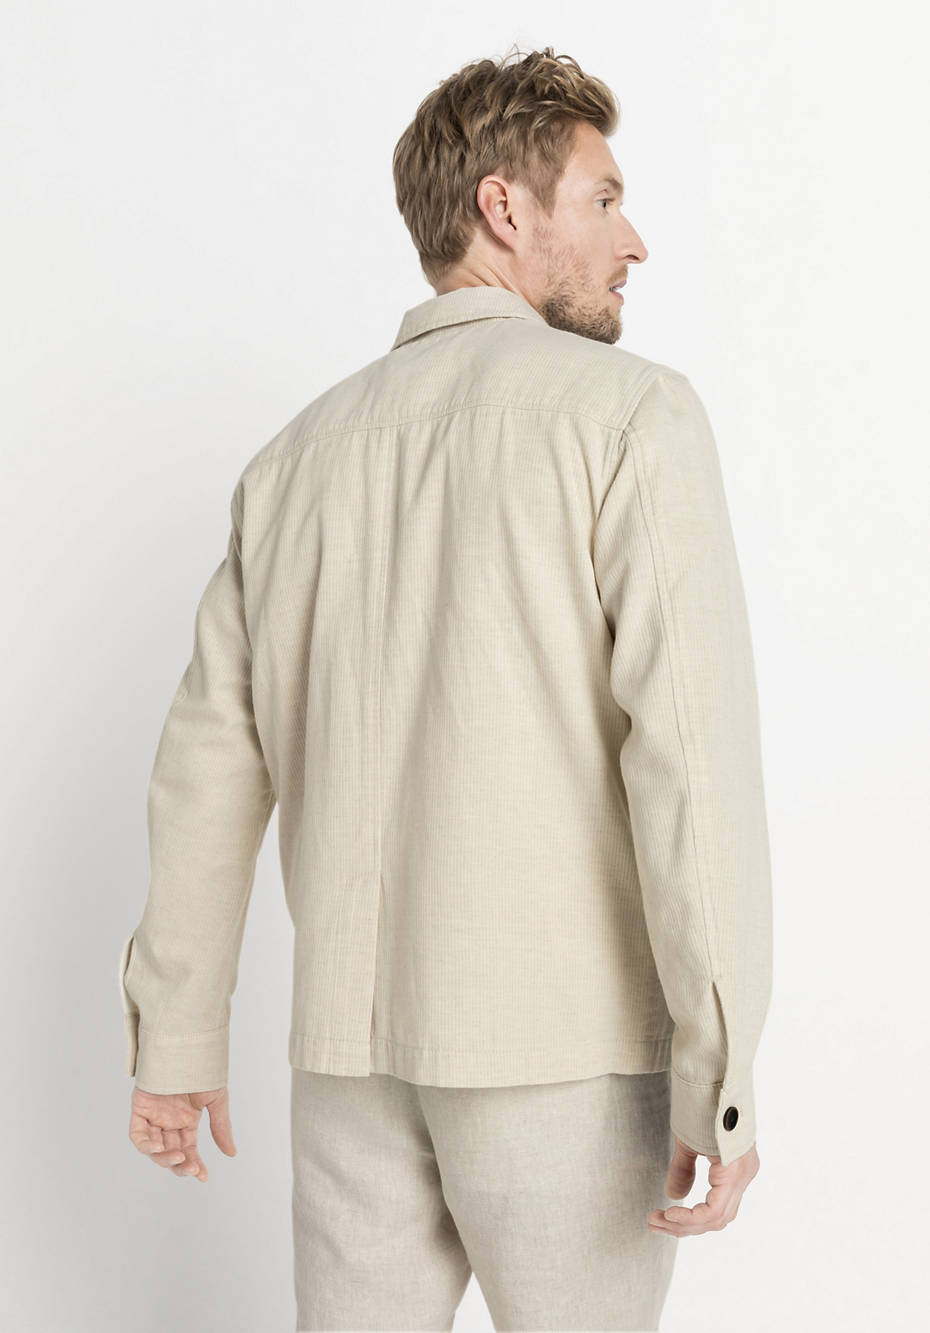 Shirt jacket made from organic cotton with linen